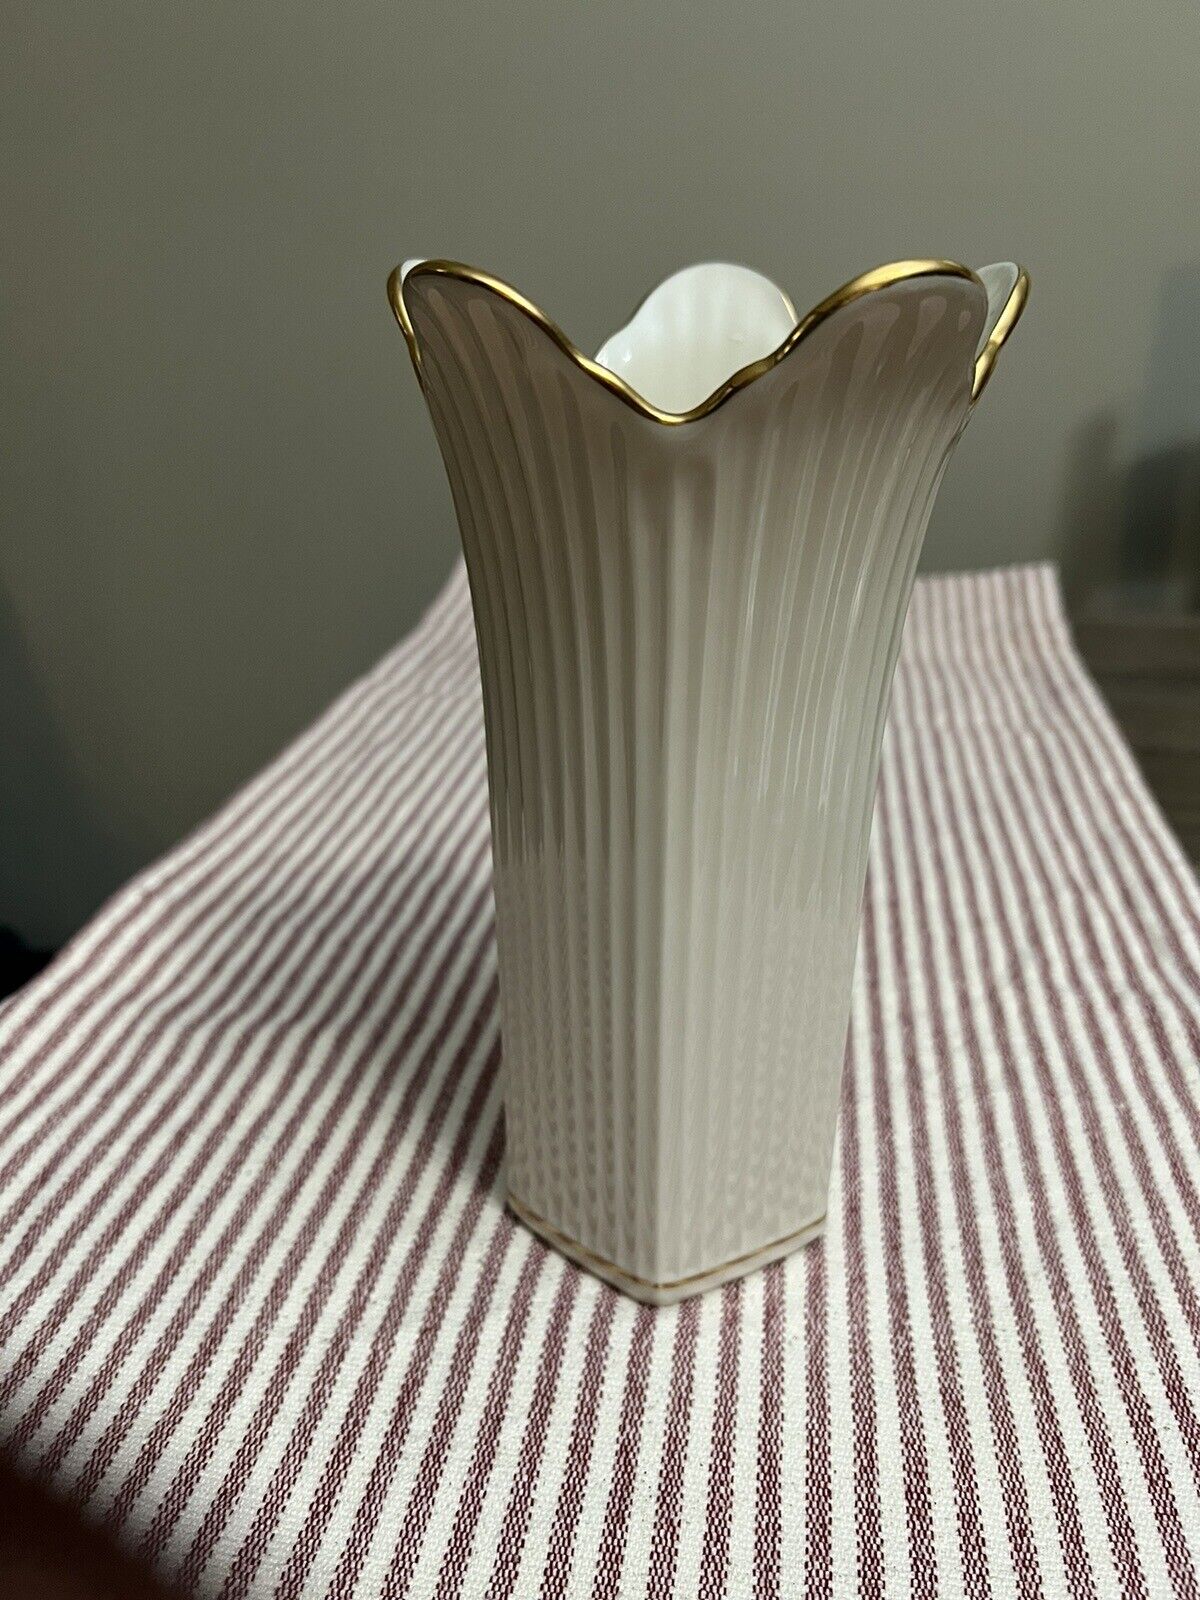 Lenox Meridian Collection Vase, Cream Colored, Gold Trim, Ribbed